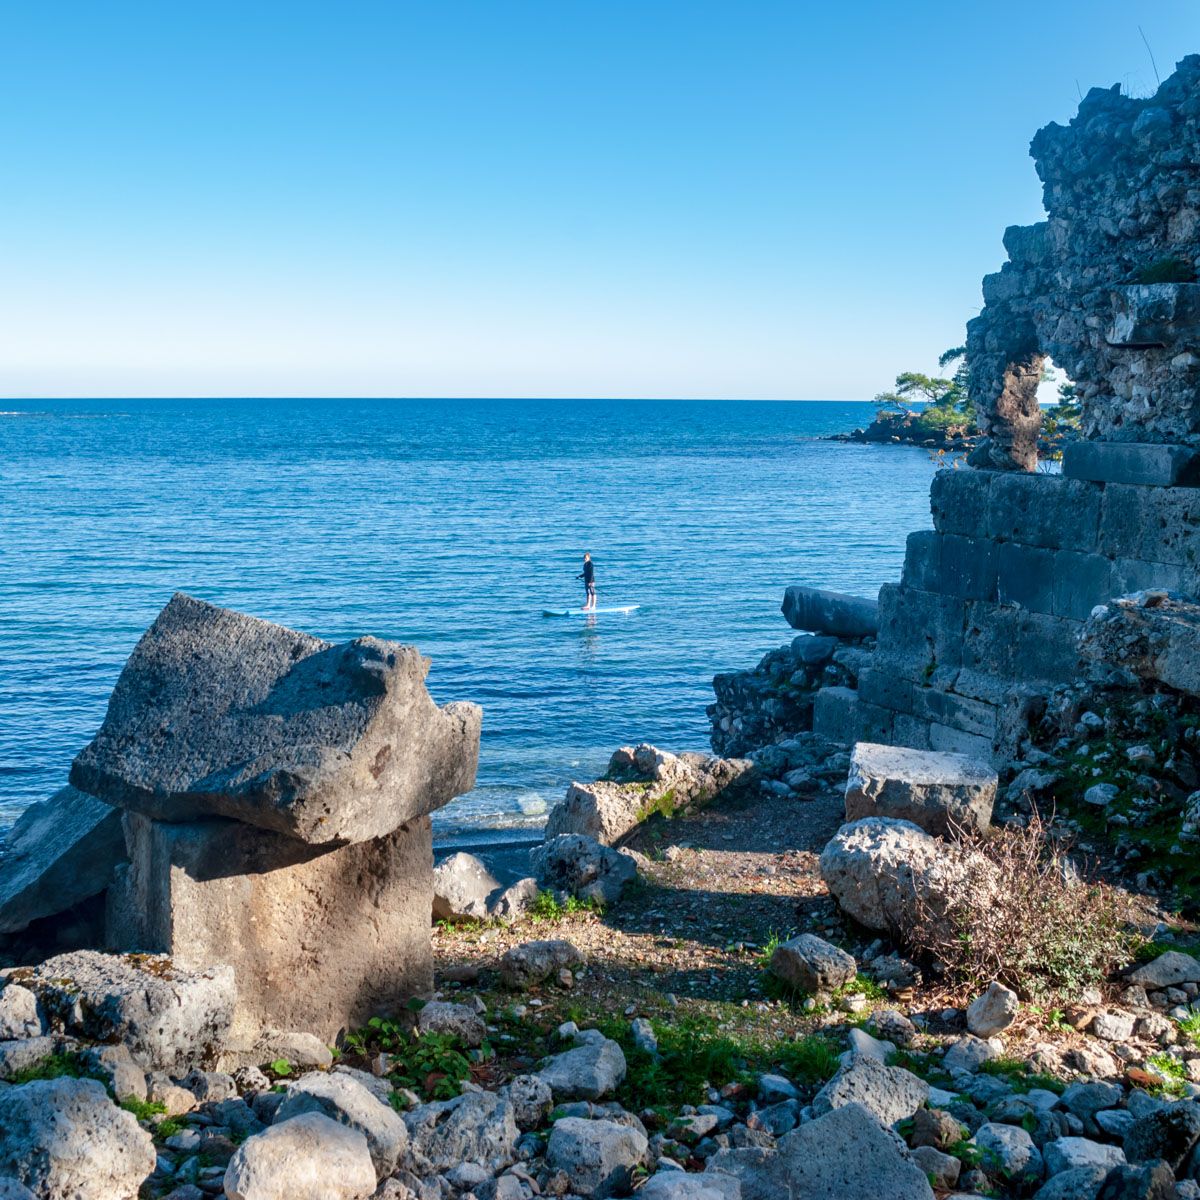 Paddleboarder through the ruins of Phaselis